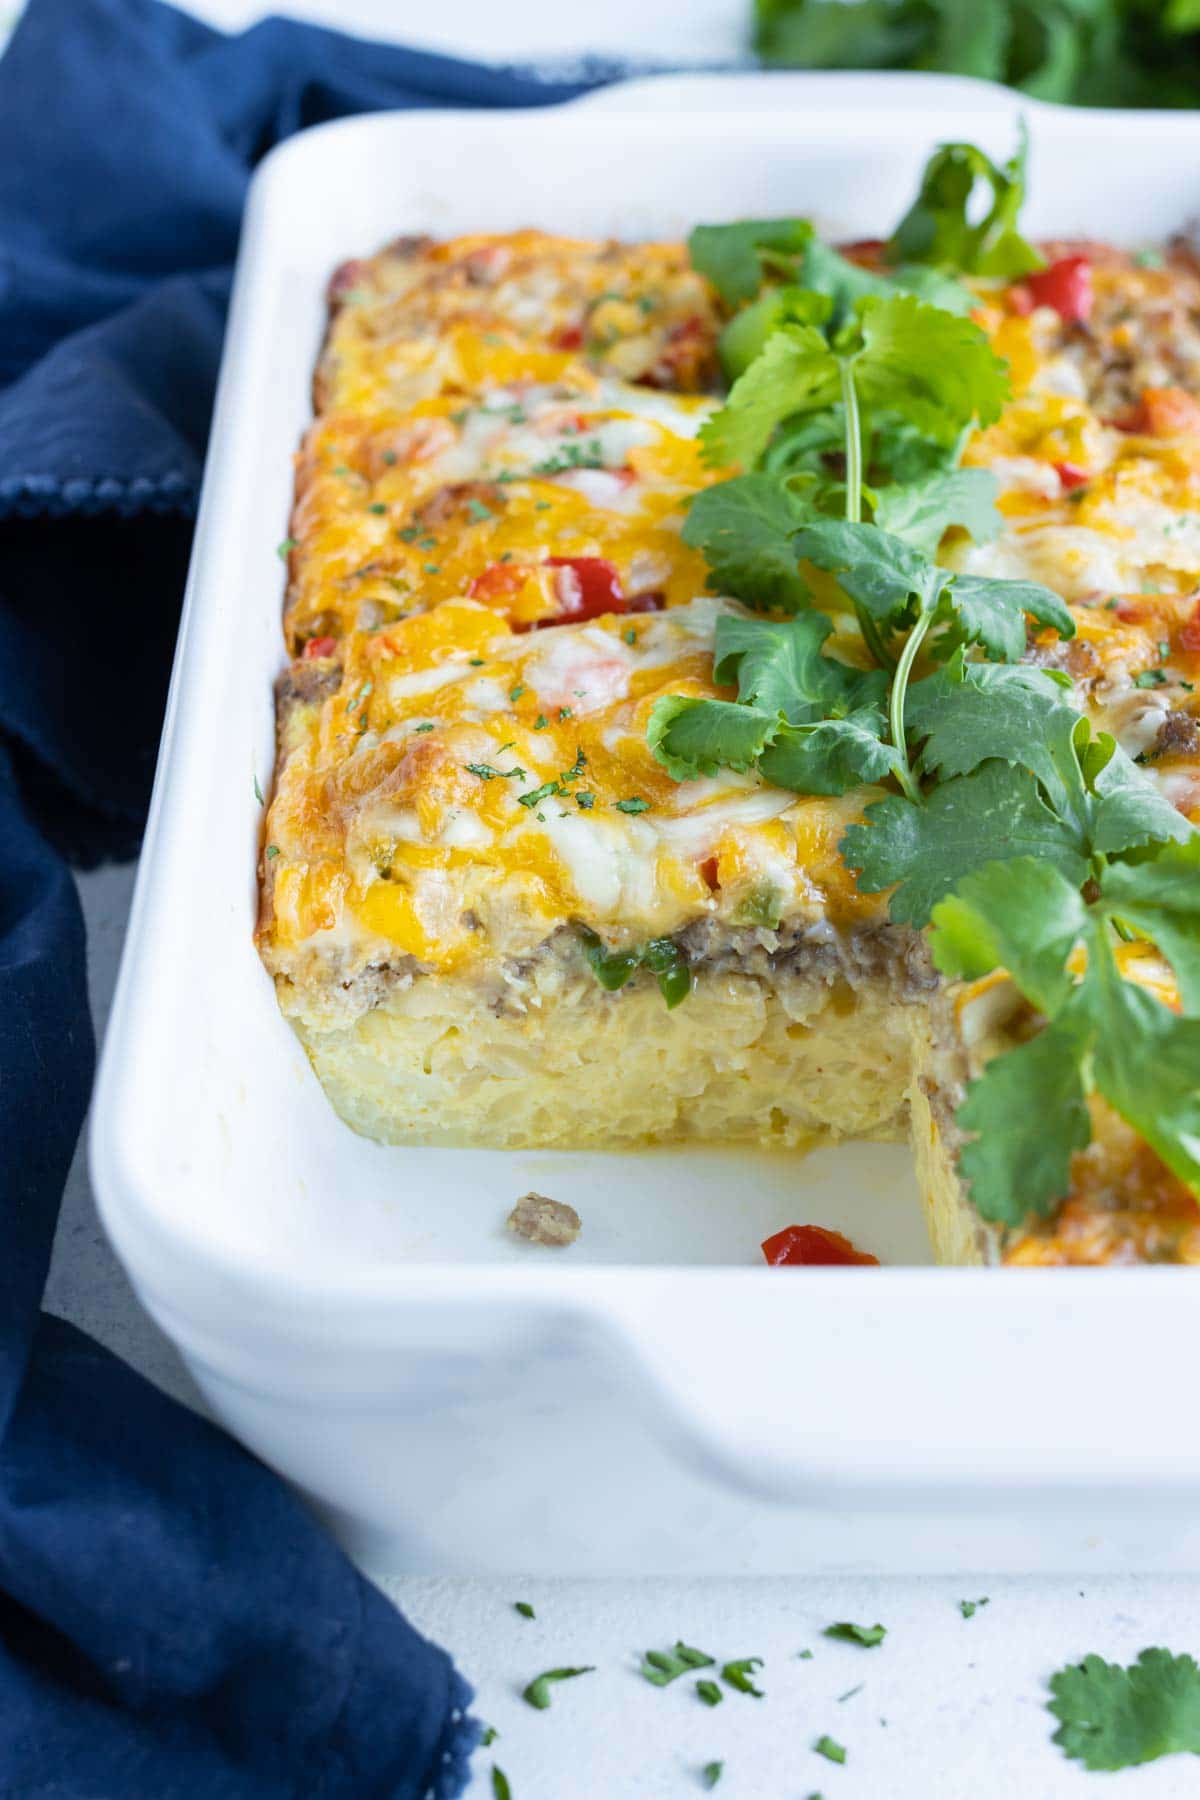 A serving of breakfast casserole is removed from the baking dish.